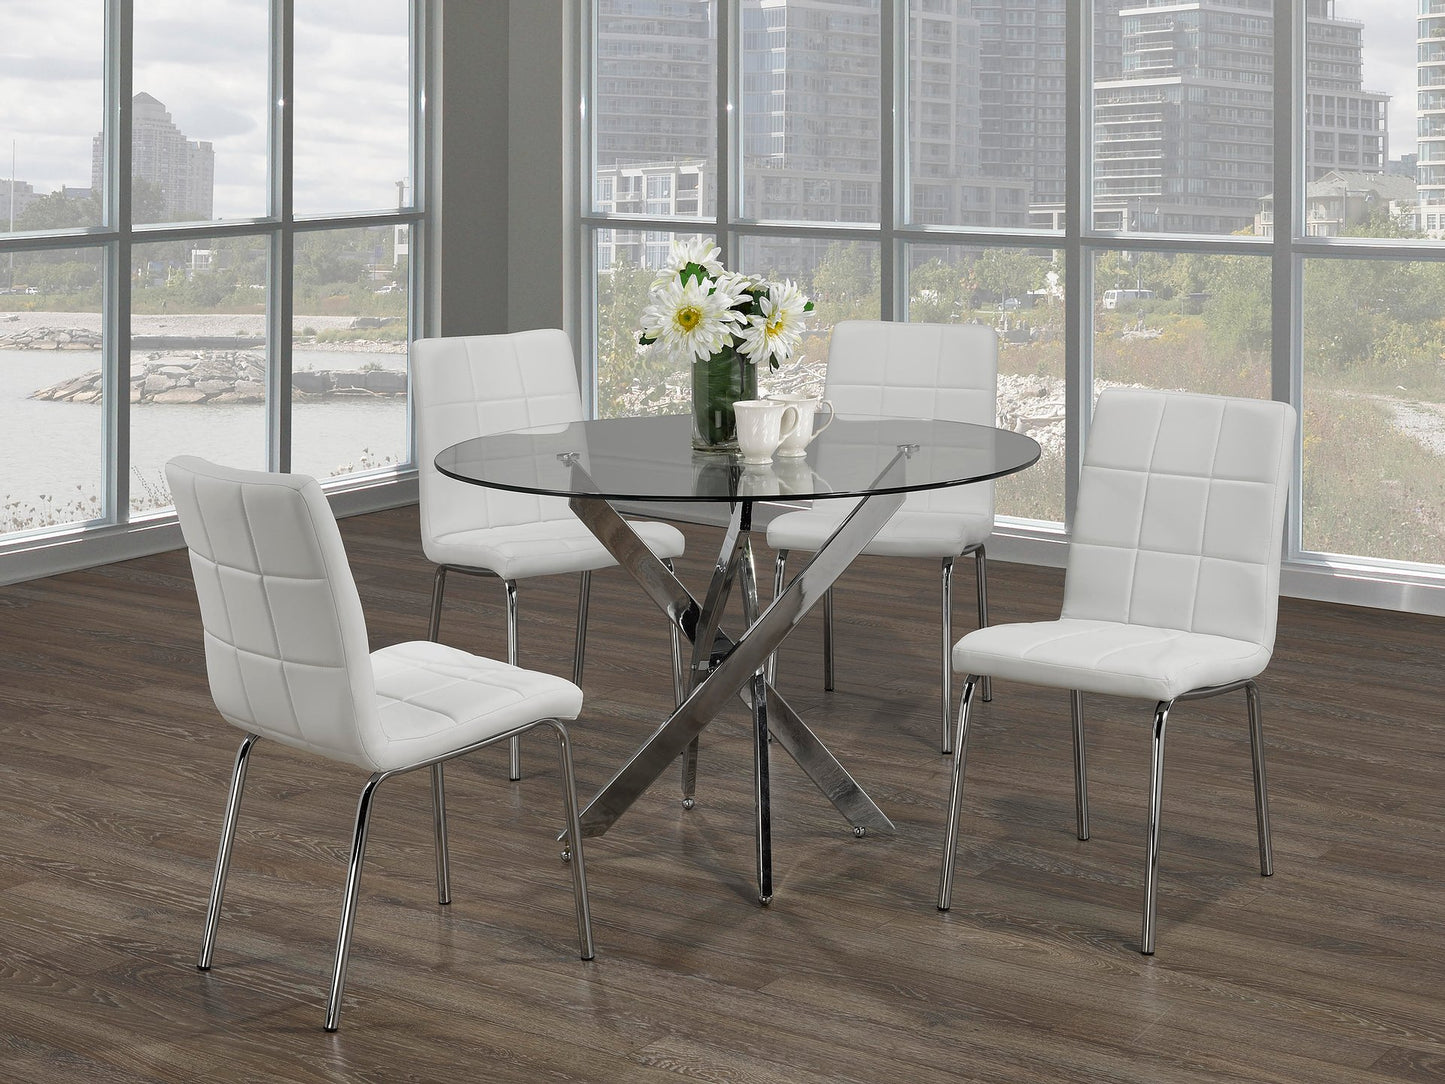 (3460 - 1761 WHITE- 5) - 39" ROUND - GLASS DINING TABLE - WITH 4 CHAIRS